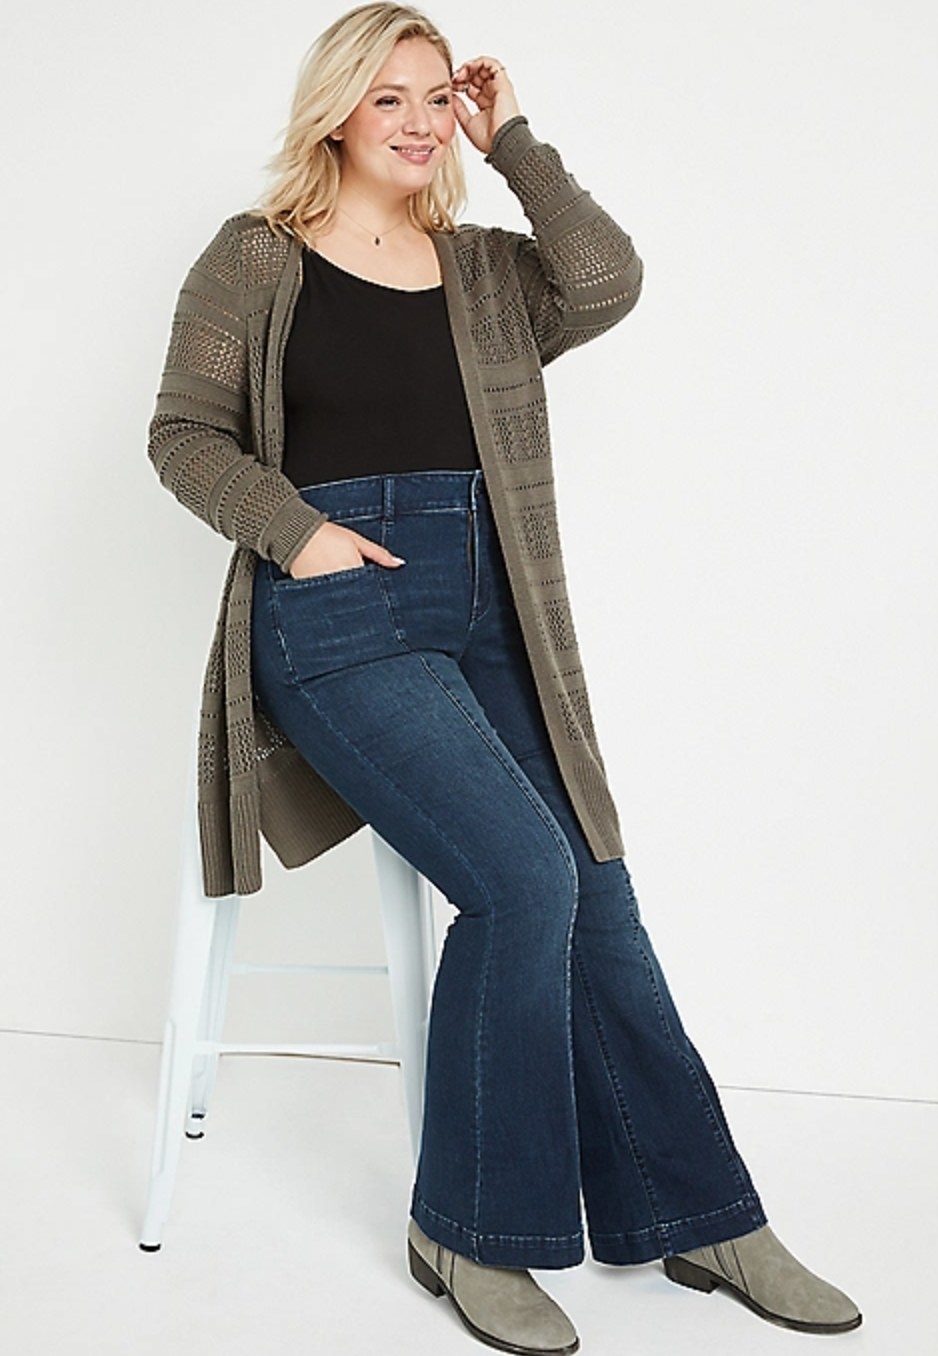 model wearing the flare jeans sitting on a white chair with a black top and green cardigan